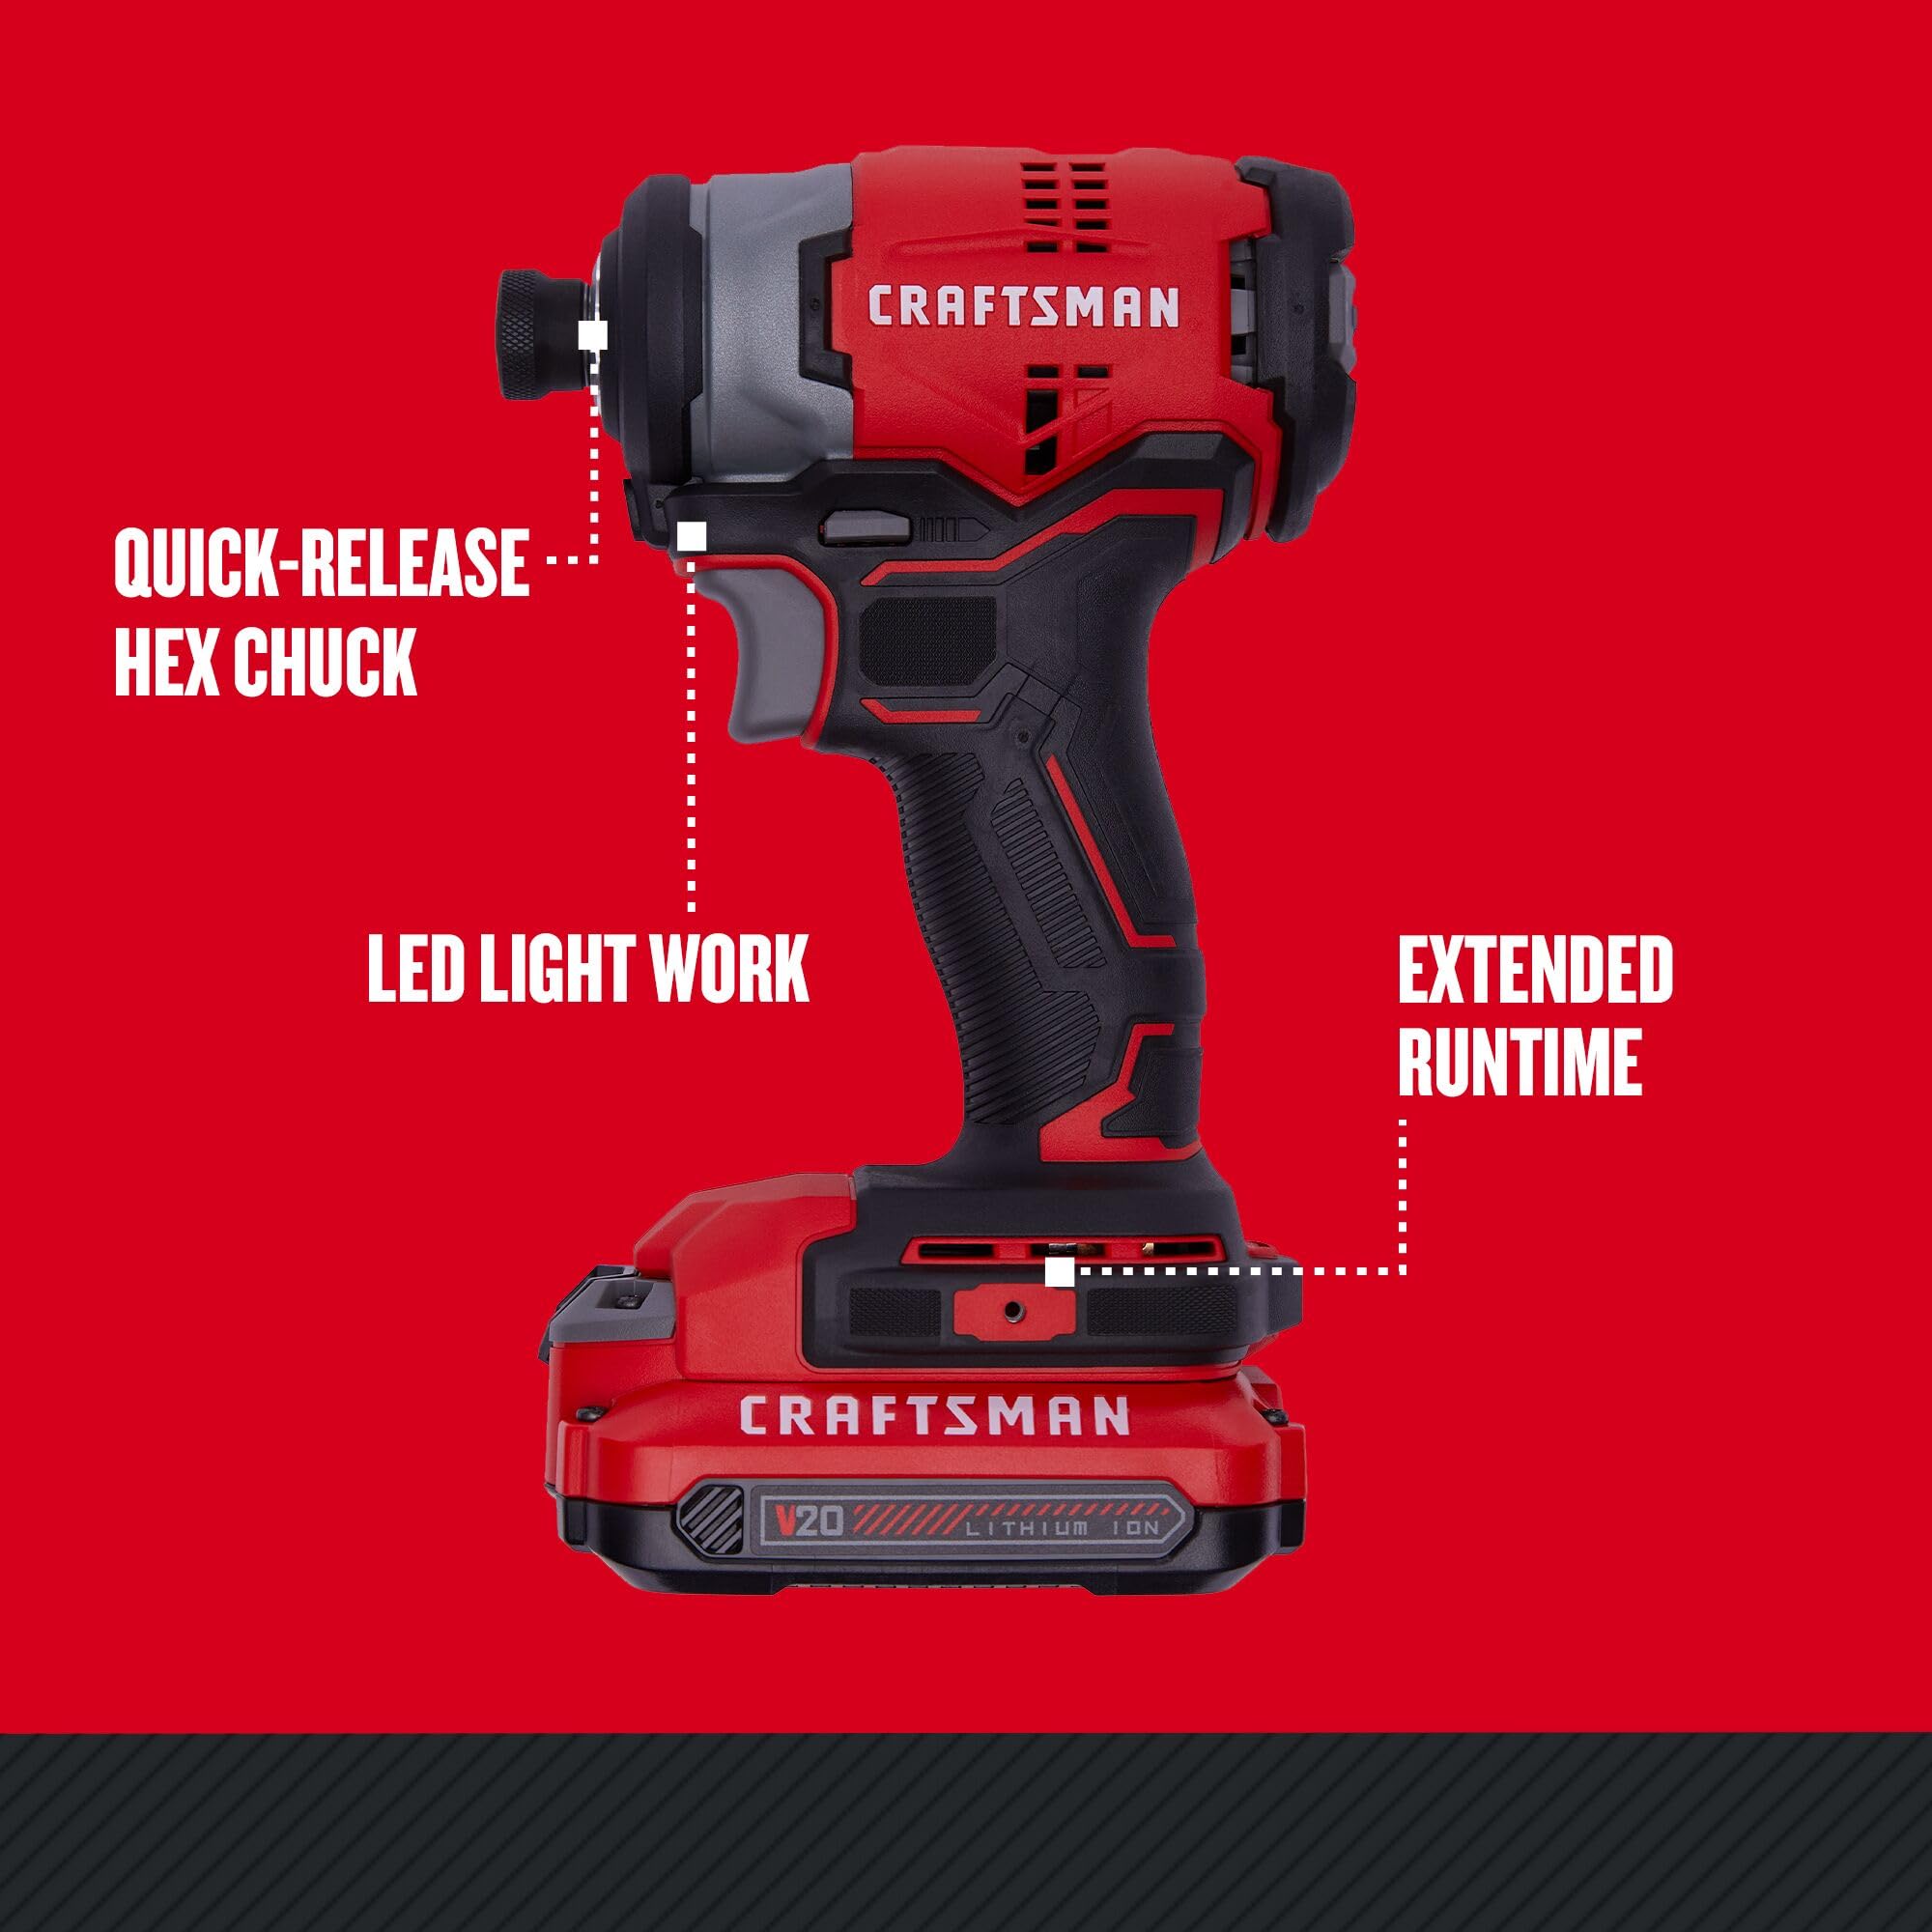 CRAFTSMAN V20 Max Impact Driver, Cordless, Variable Speed Trigger 2,800-3,500 RPM (CMCF810C2)